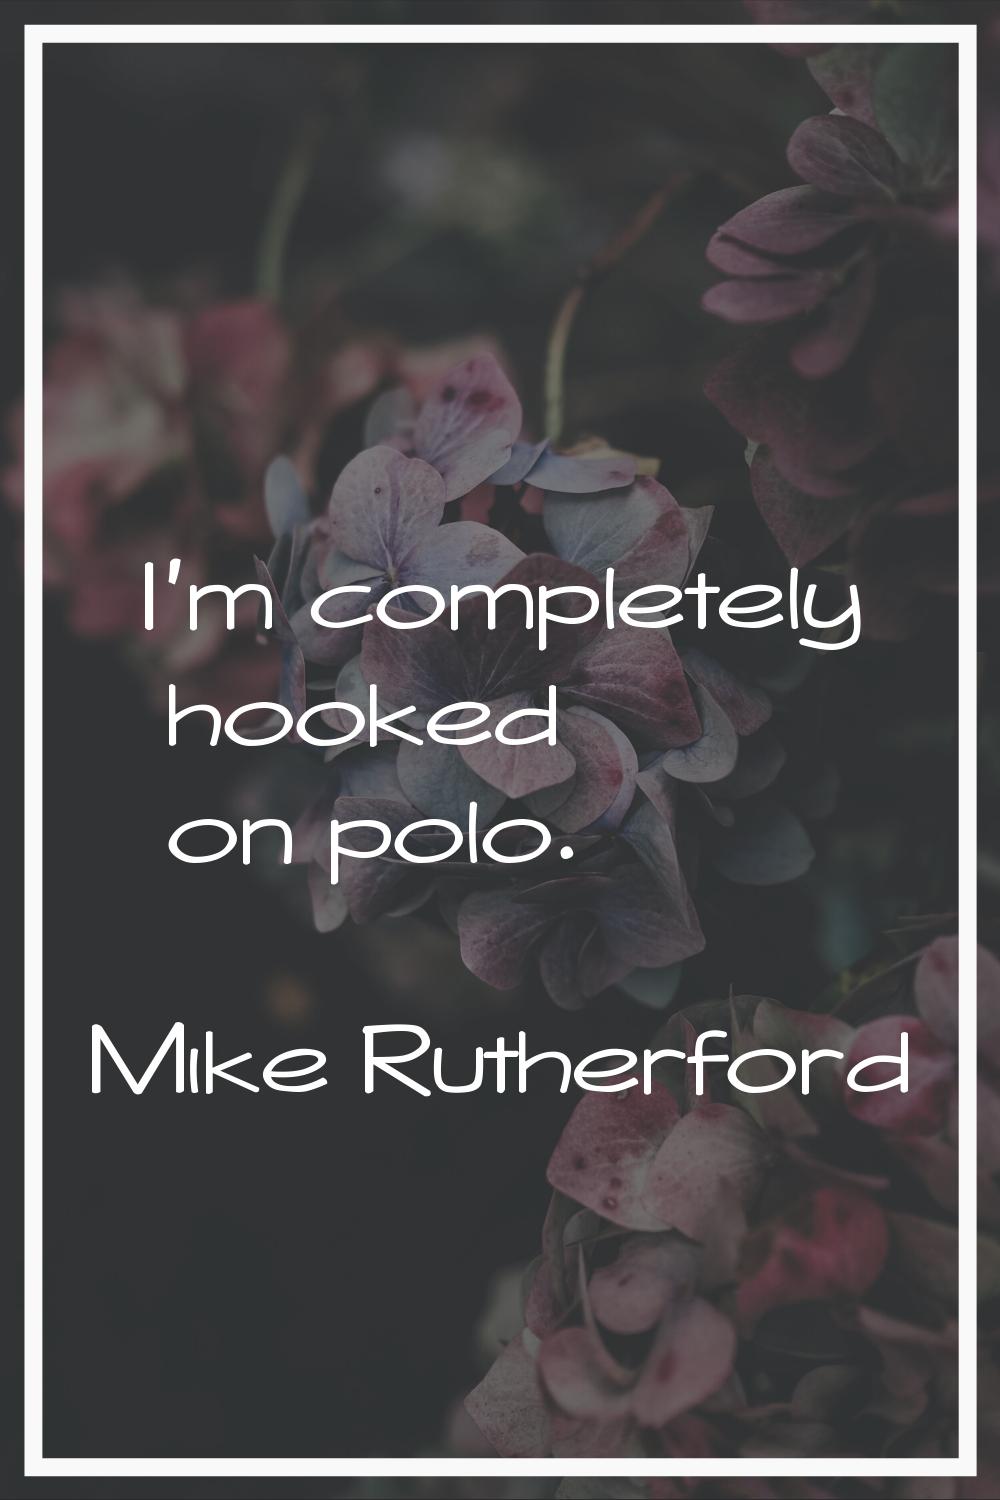 I'm completely hooked on polo.